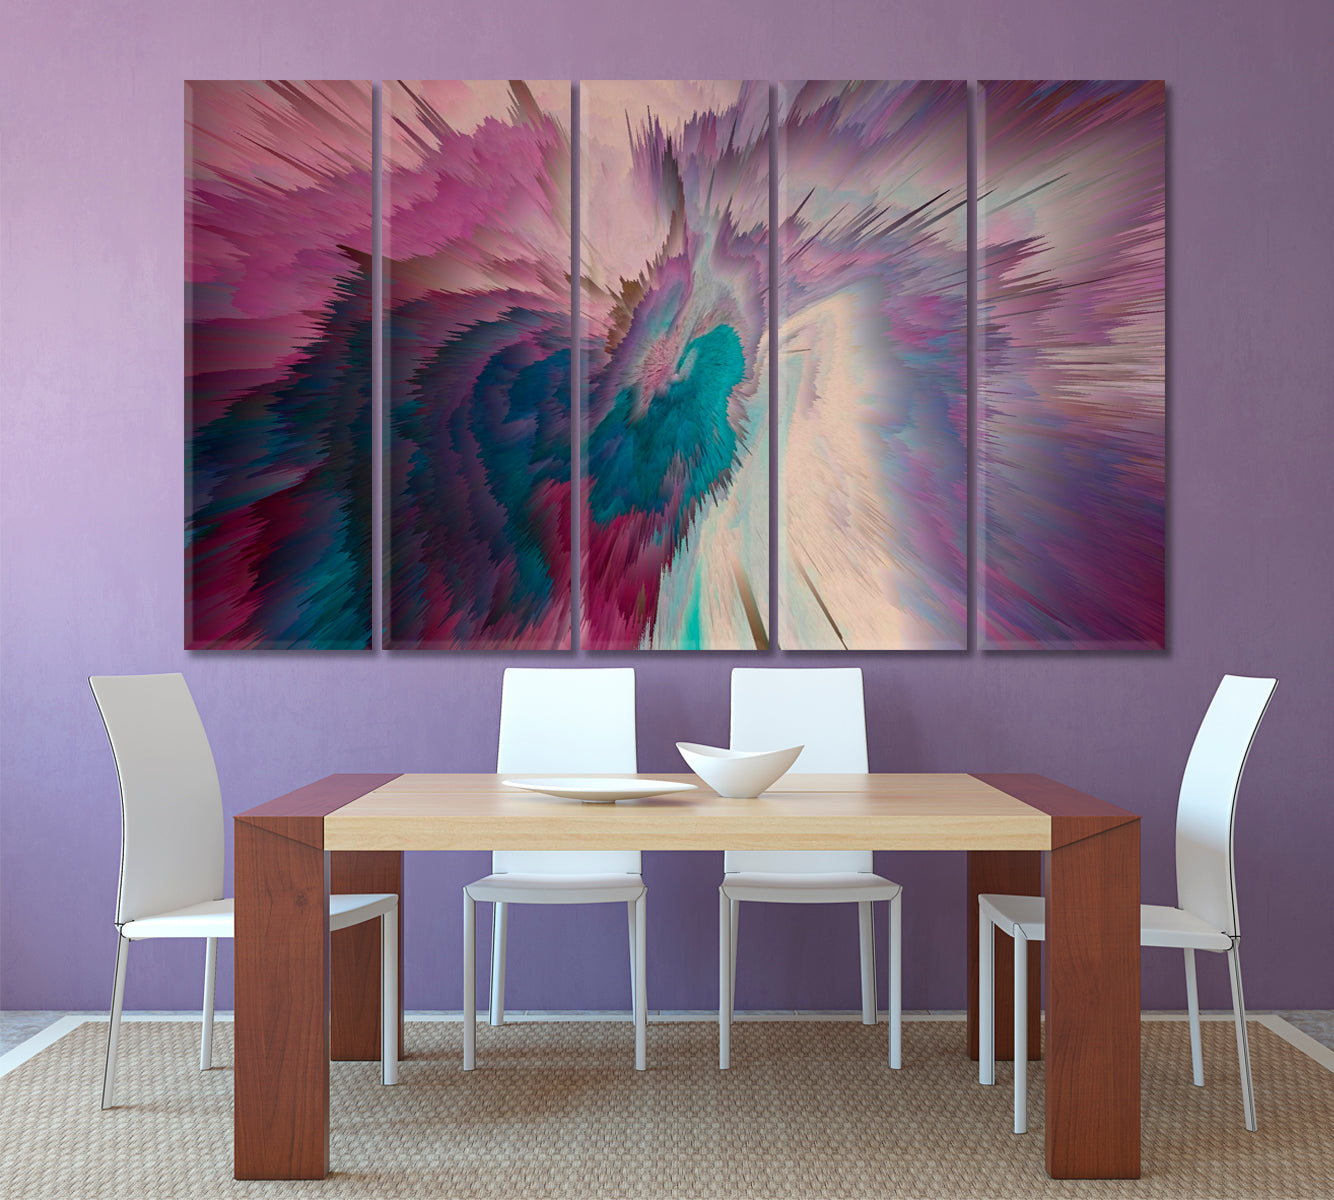 Colorful Abstract Space Abstract Art Print Artesty 5 panels 36" x 24" 